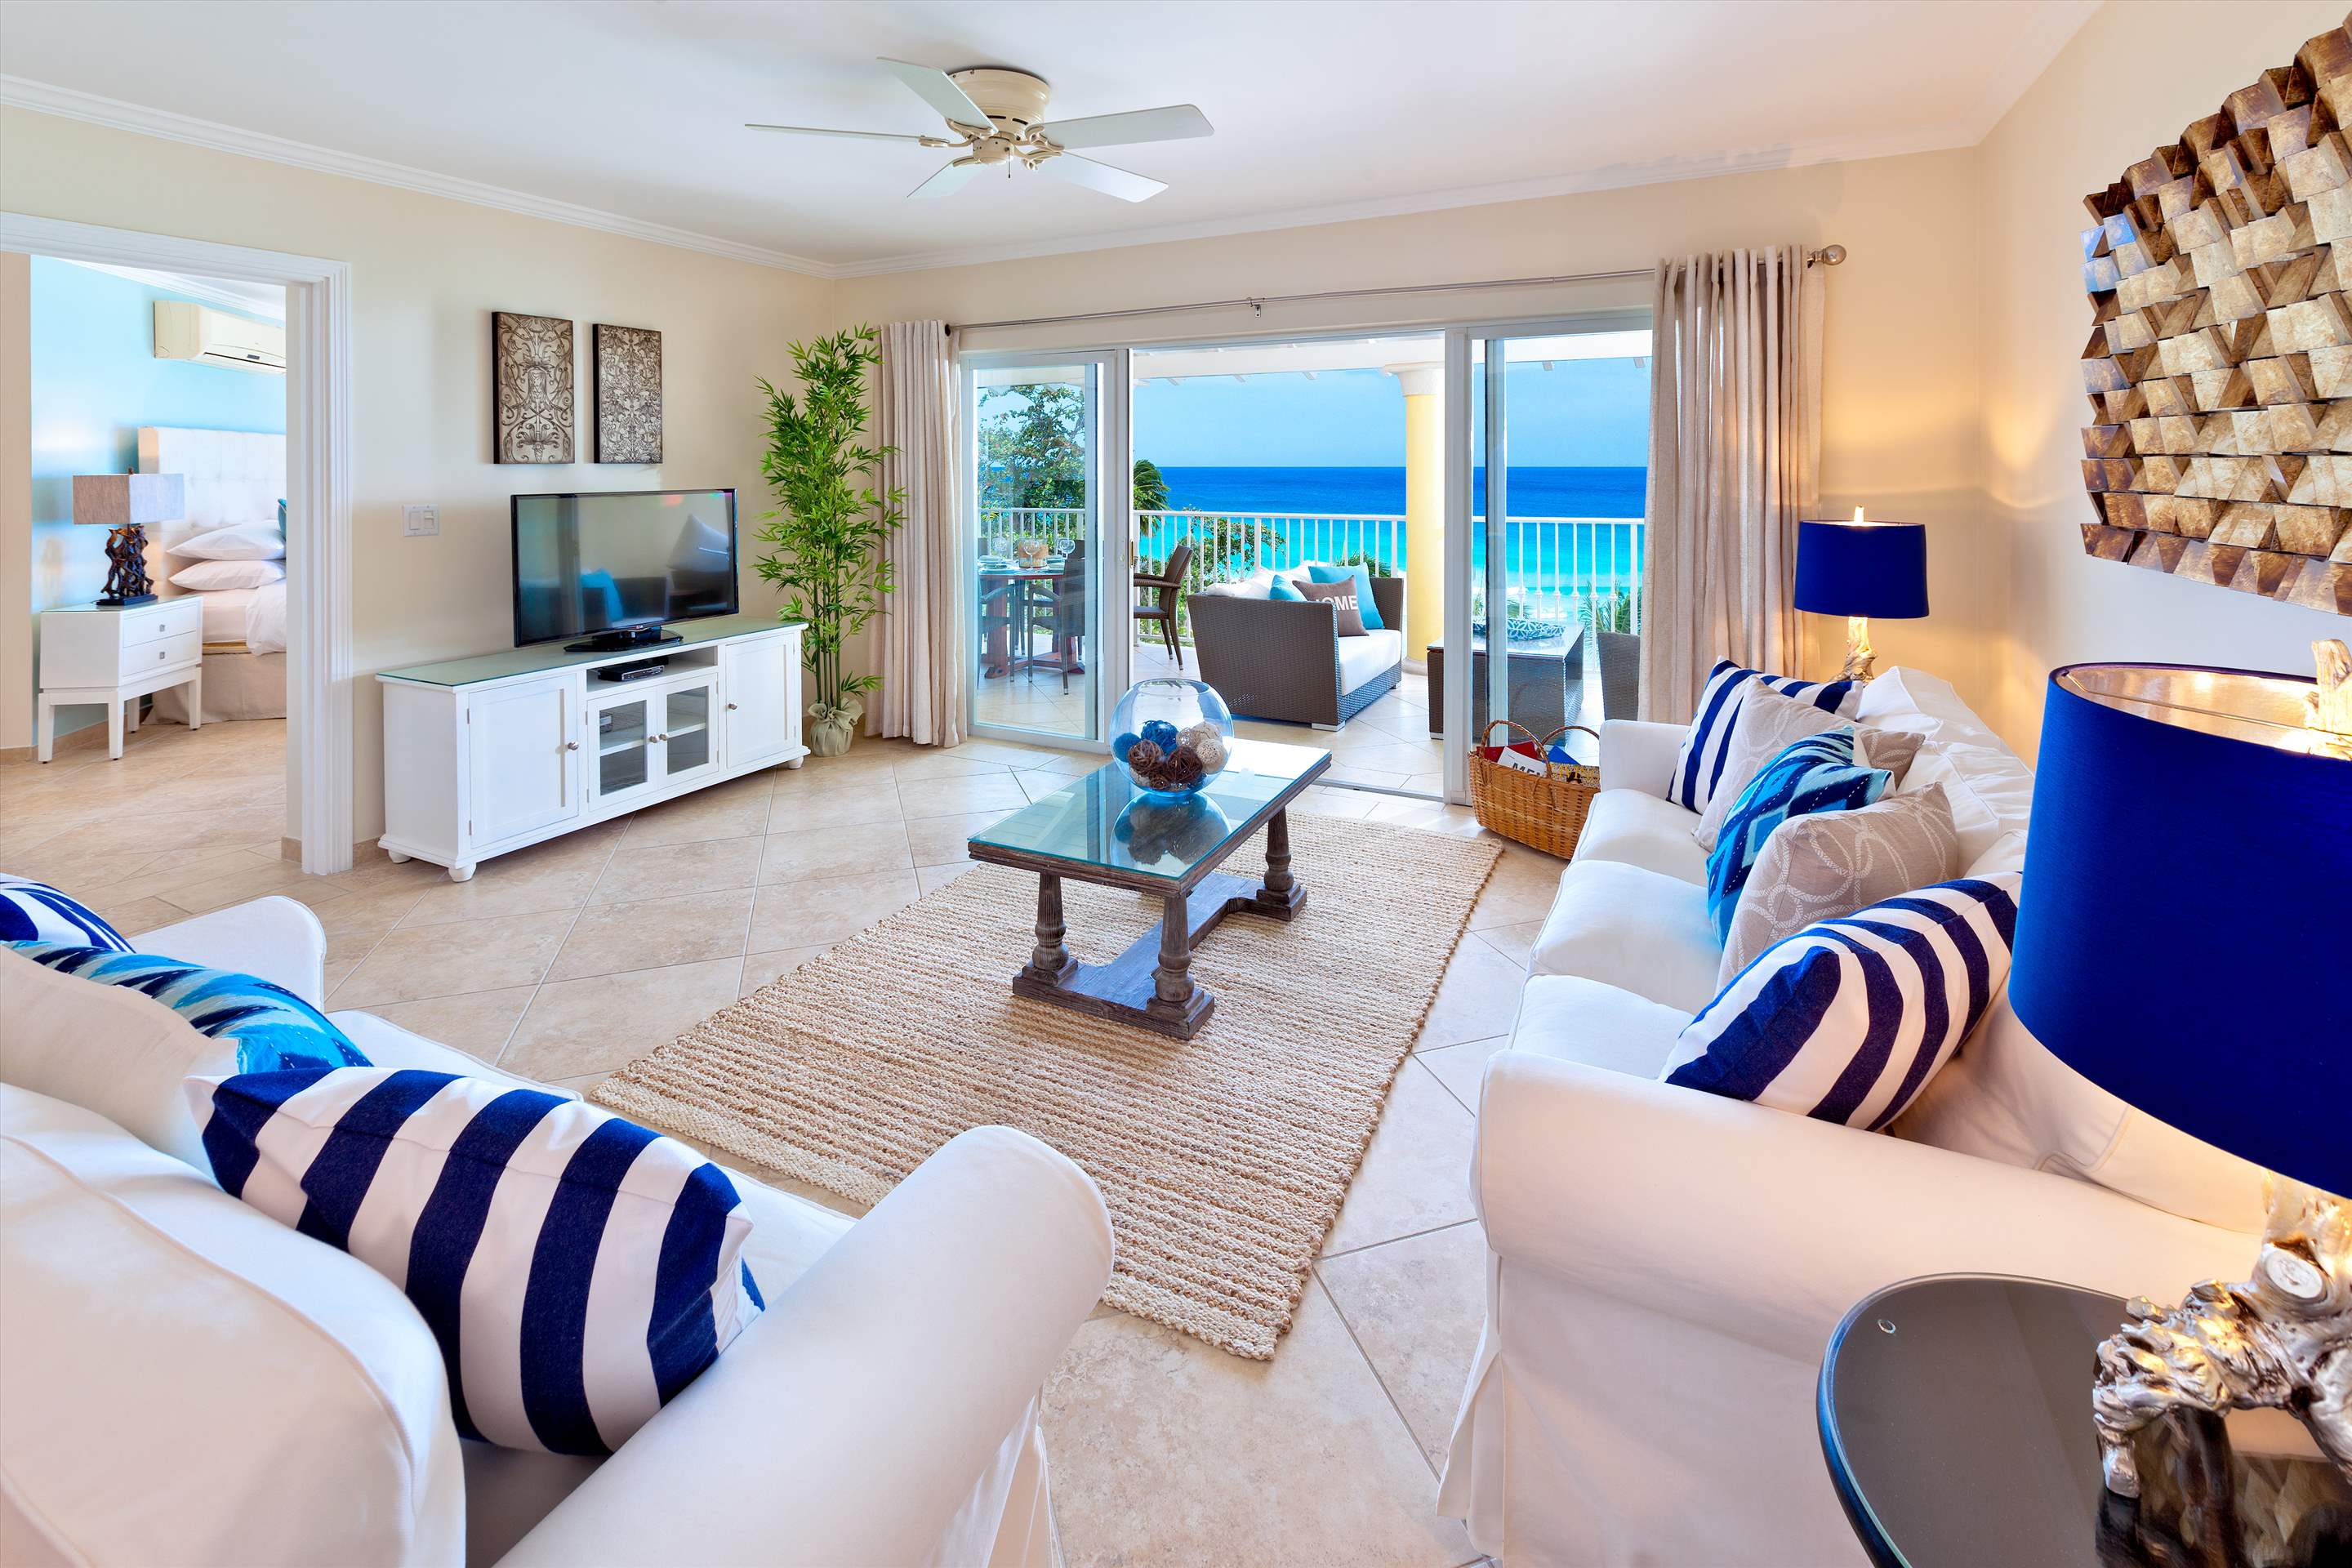 Sapphire Beach 517, 2 bedroom, 3 bedroom apartment in St. Lawrence Gap & South Coast, Barbados Photo #4